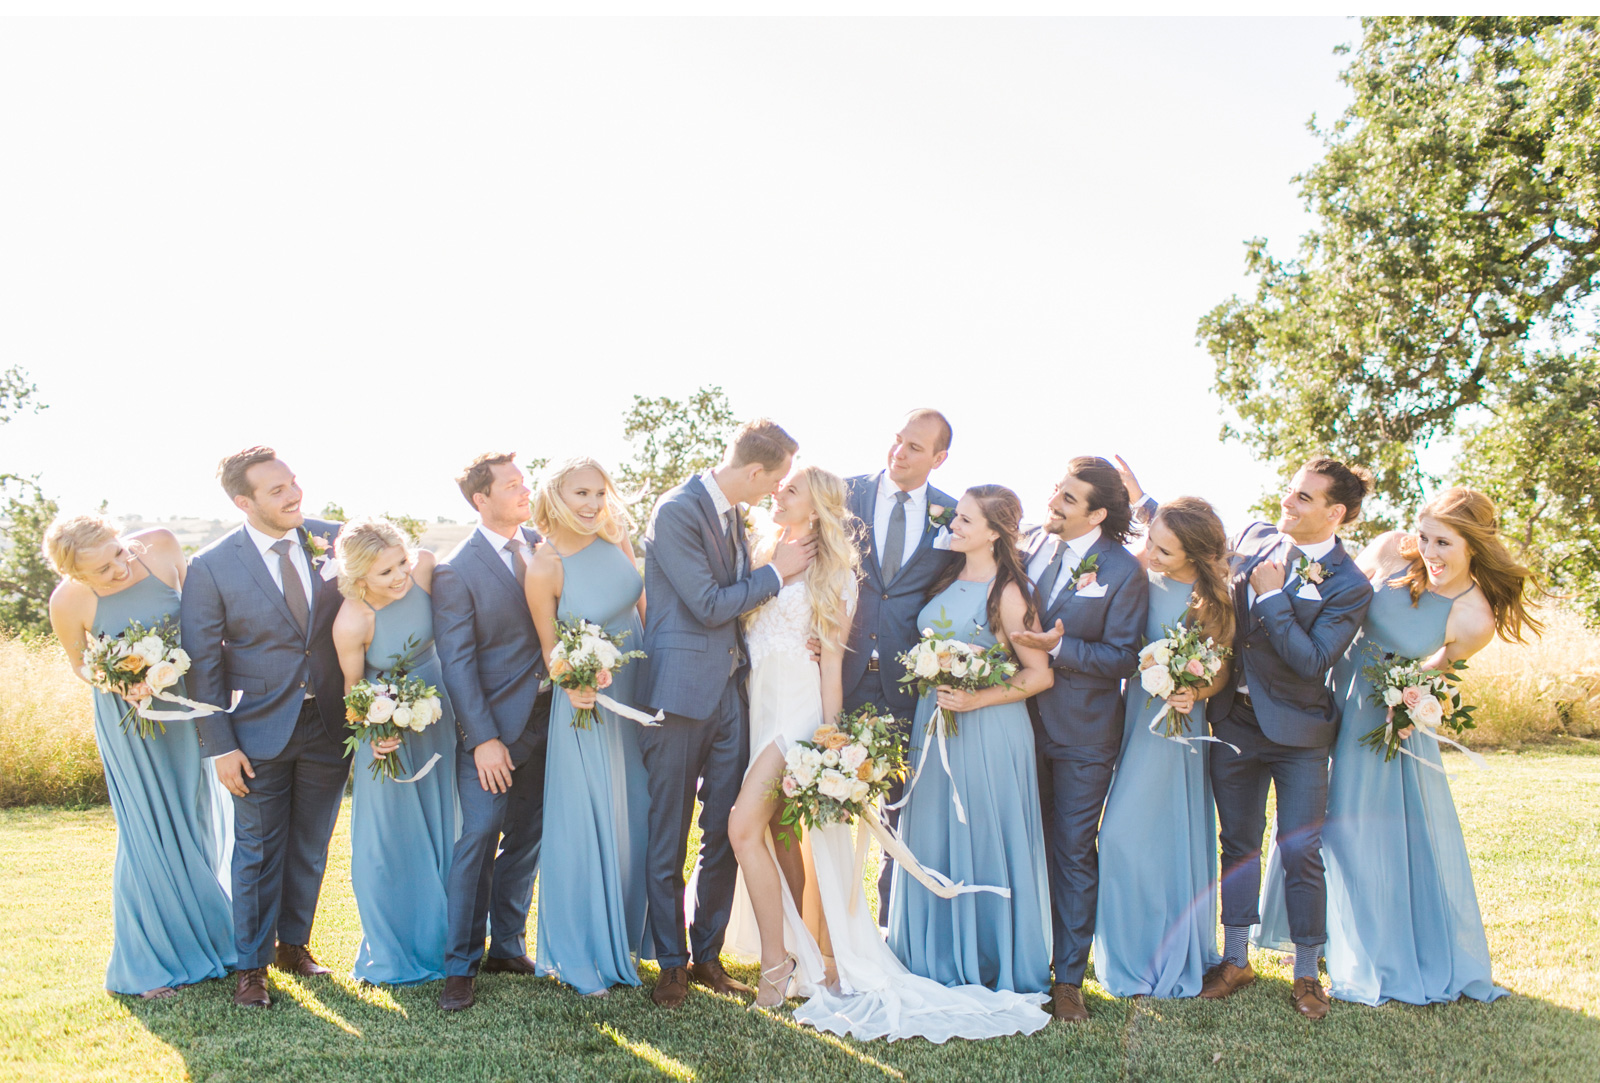 Paso-Robles-Style-Me-Pretty-The-Knot-Wedding-Natalie-Schutt-Photography's-Wedding_08.jpg